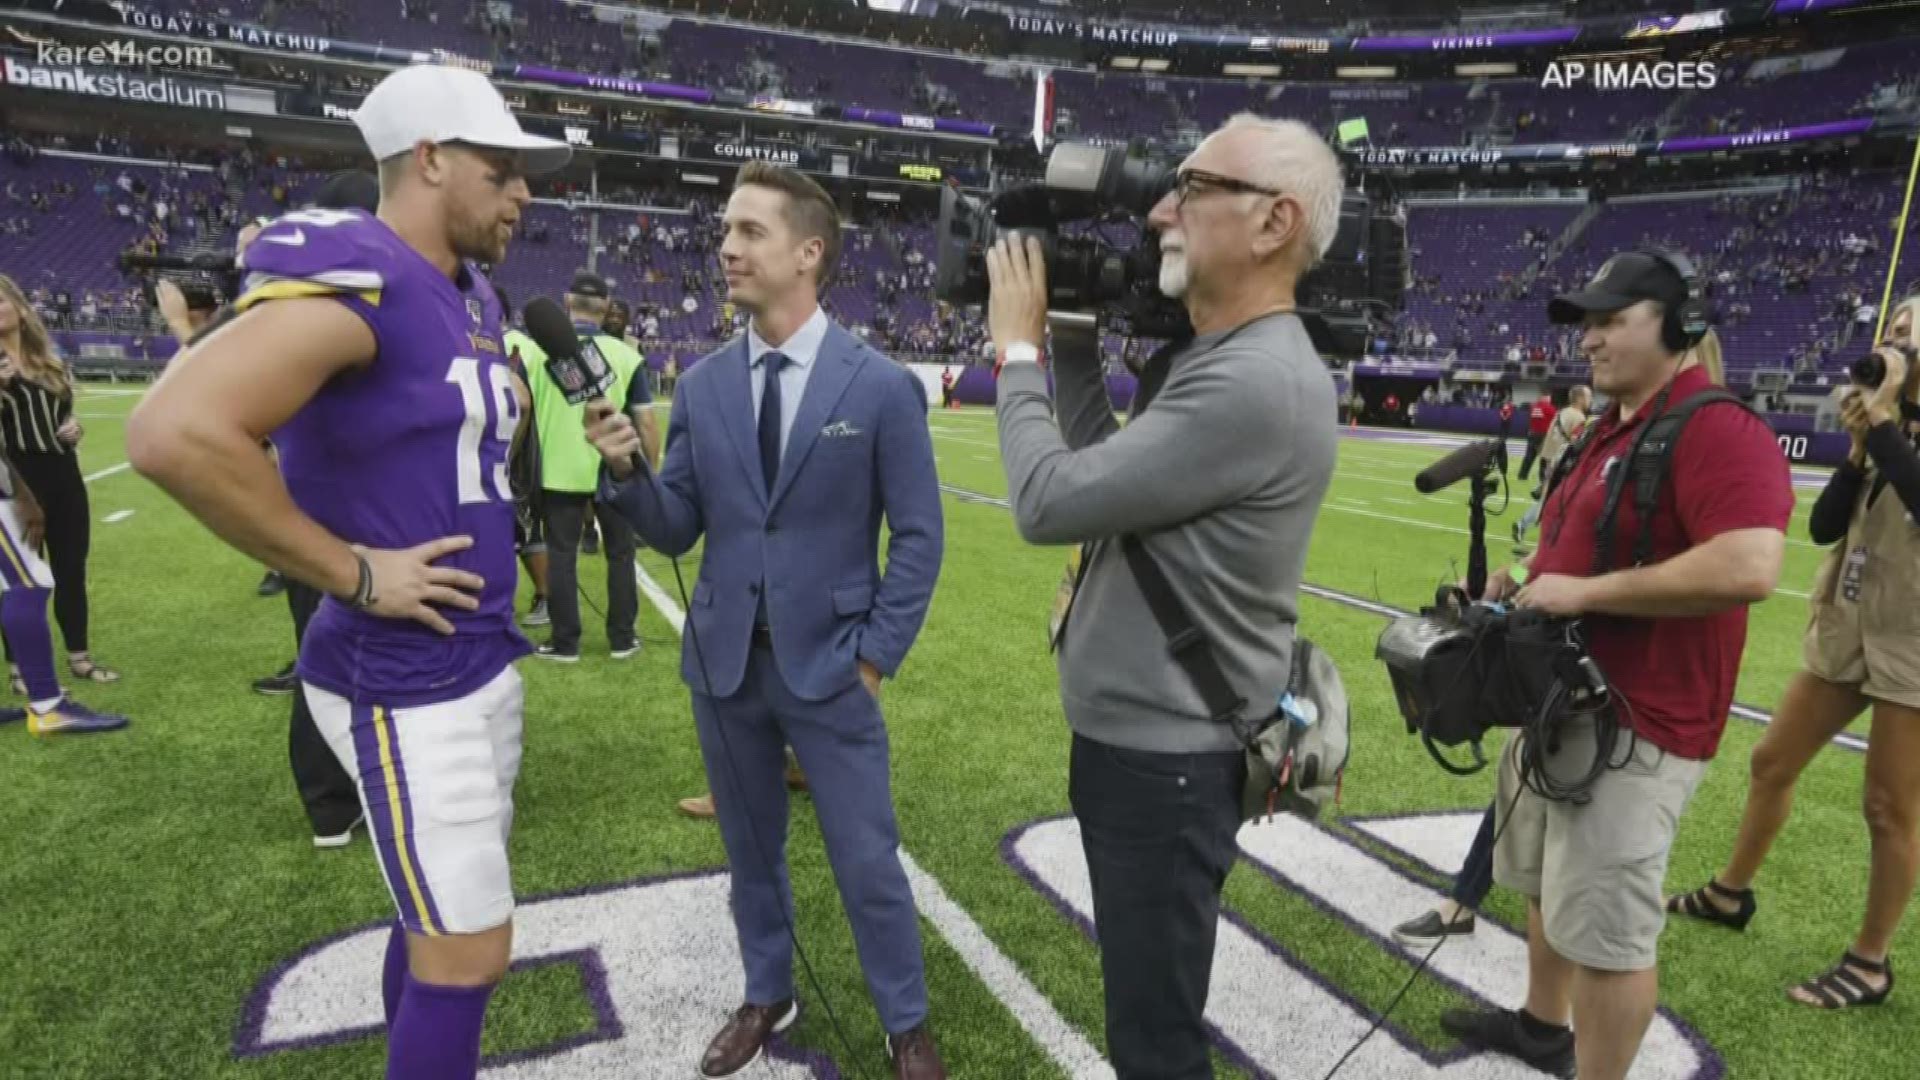 Vikings Wide Receiver Adam Thielen started with a $25,000 donation to Second Harvest Heartland